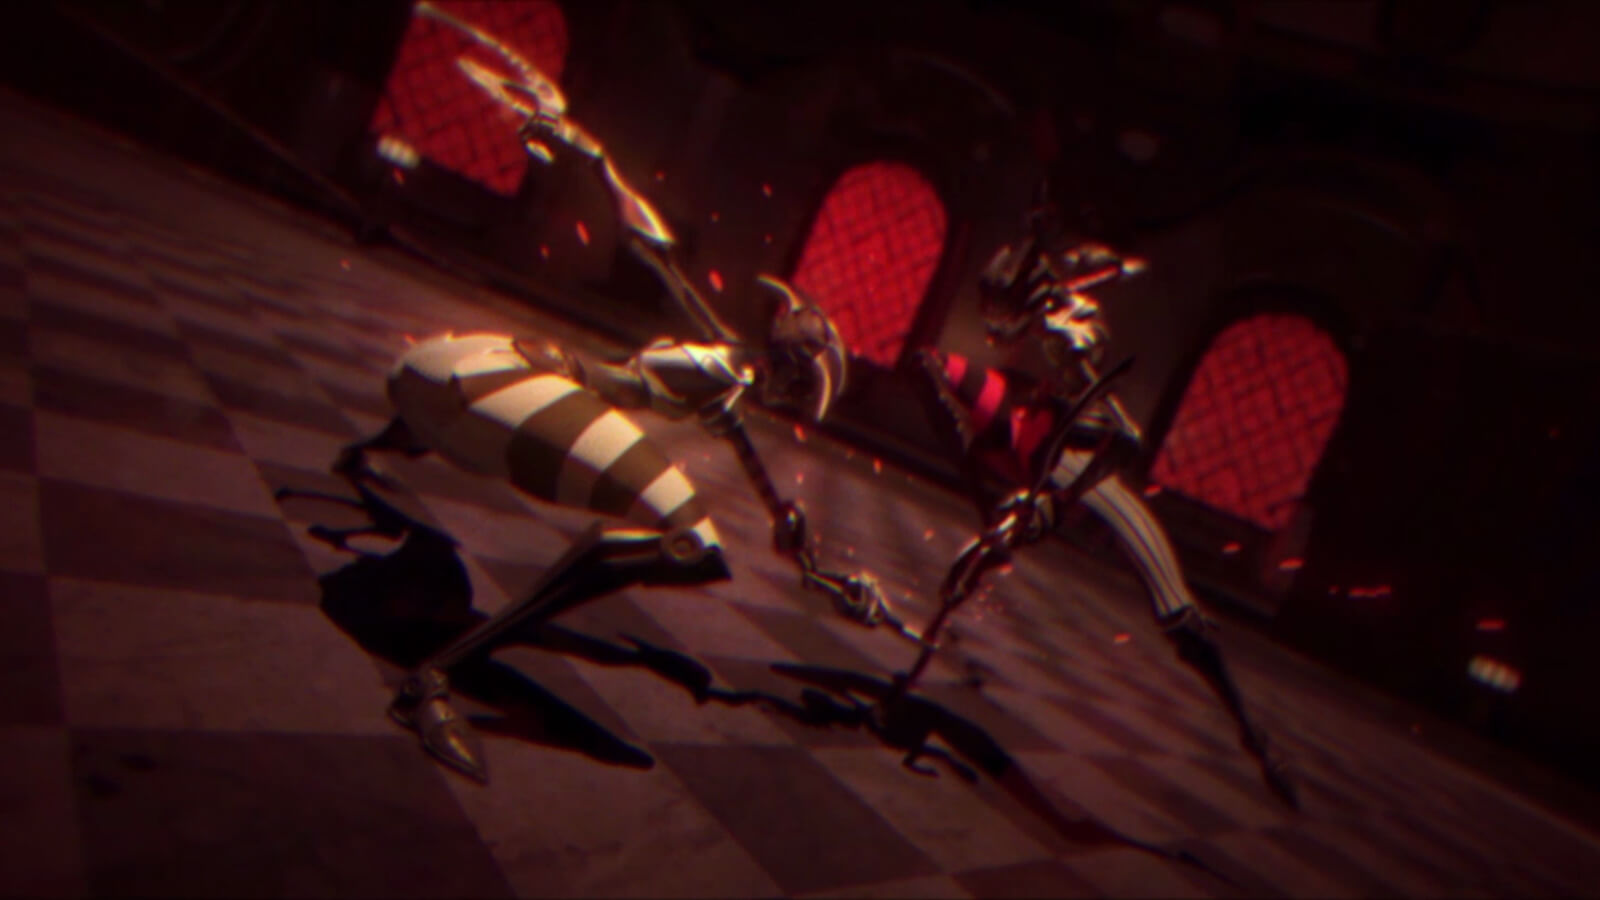 Two figures in lithe armor battle in a dimly lit room. One crouches swinging a melee weapon at the other&#039;s leg.